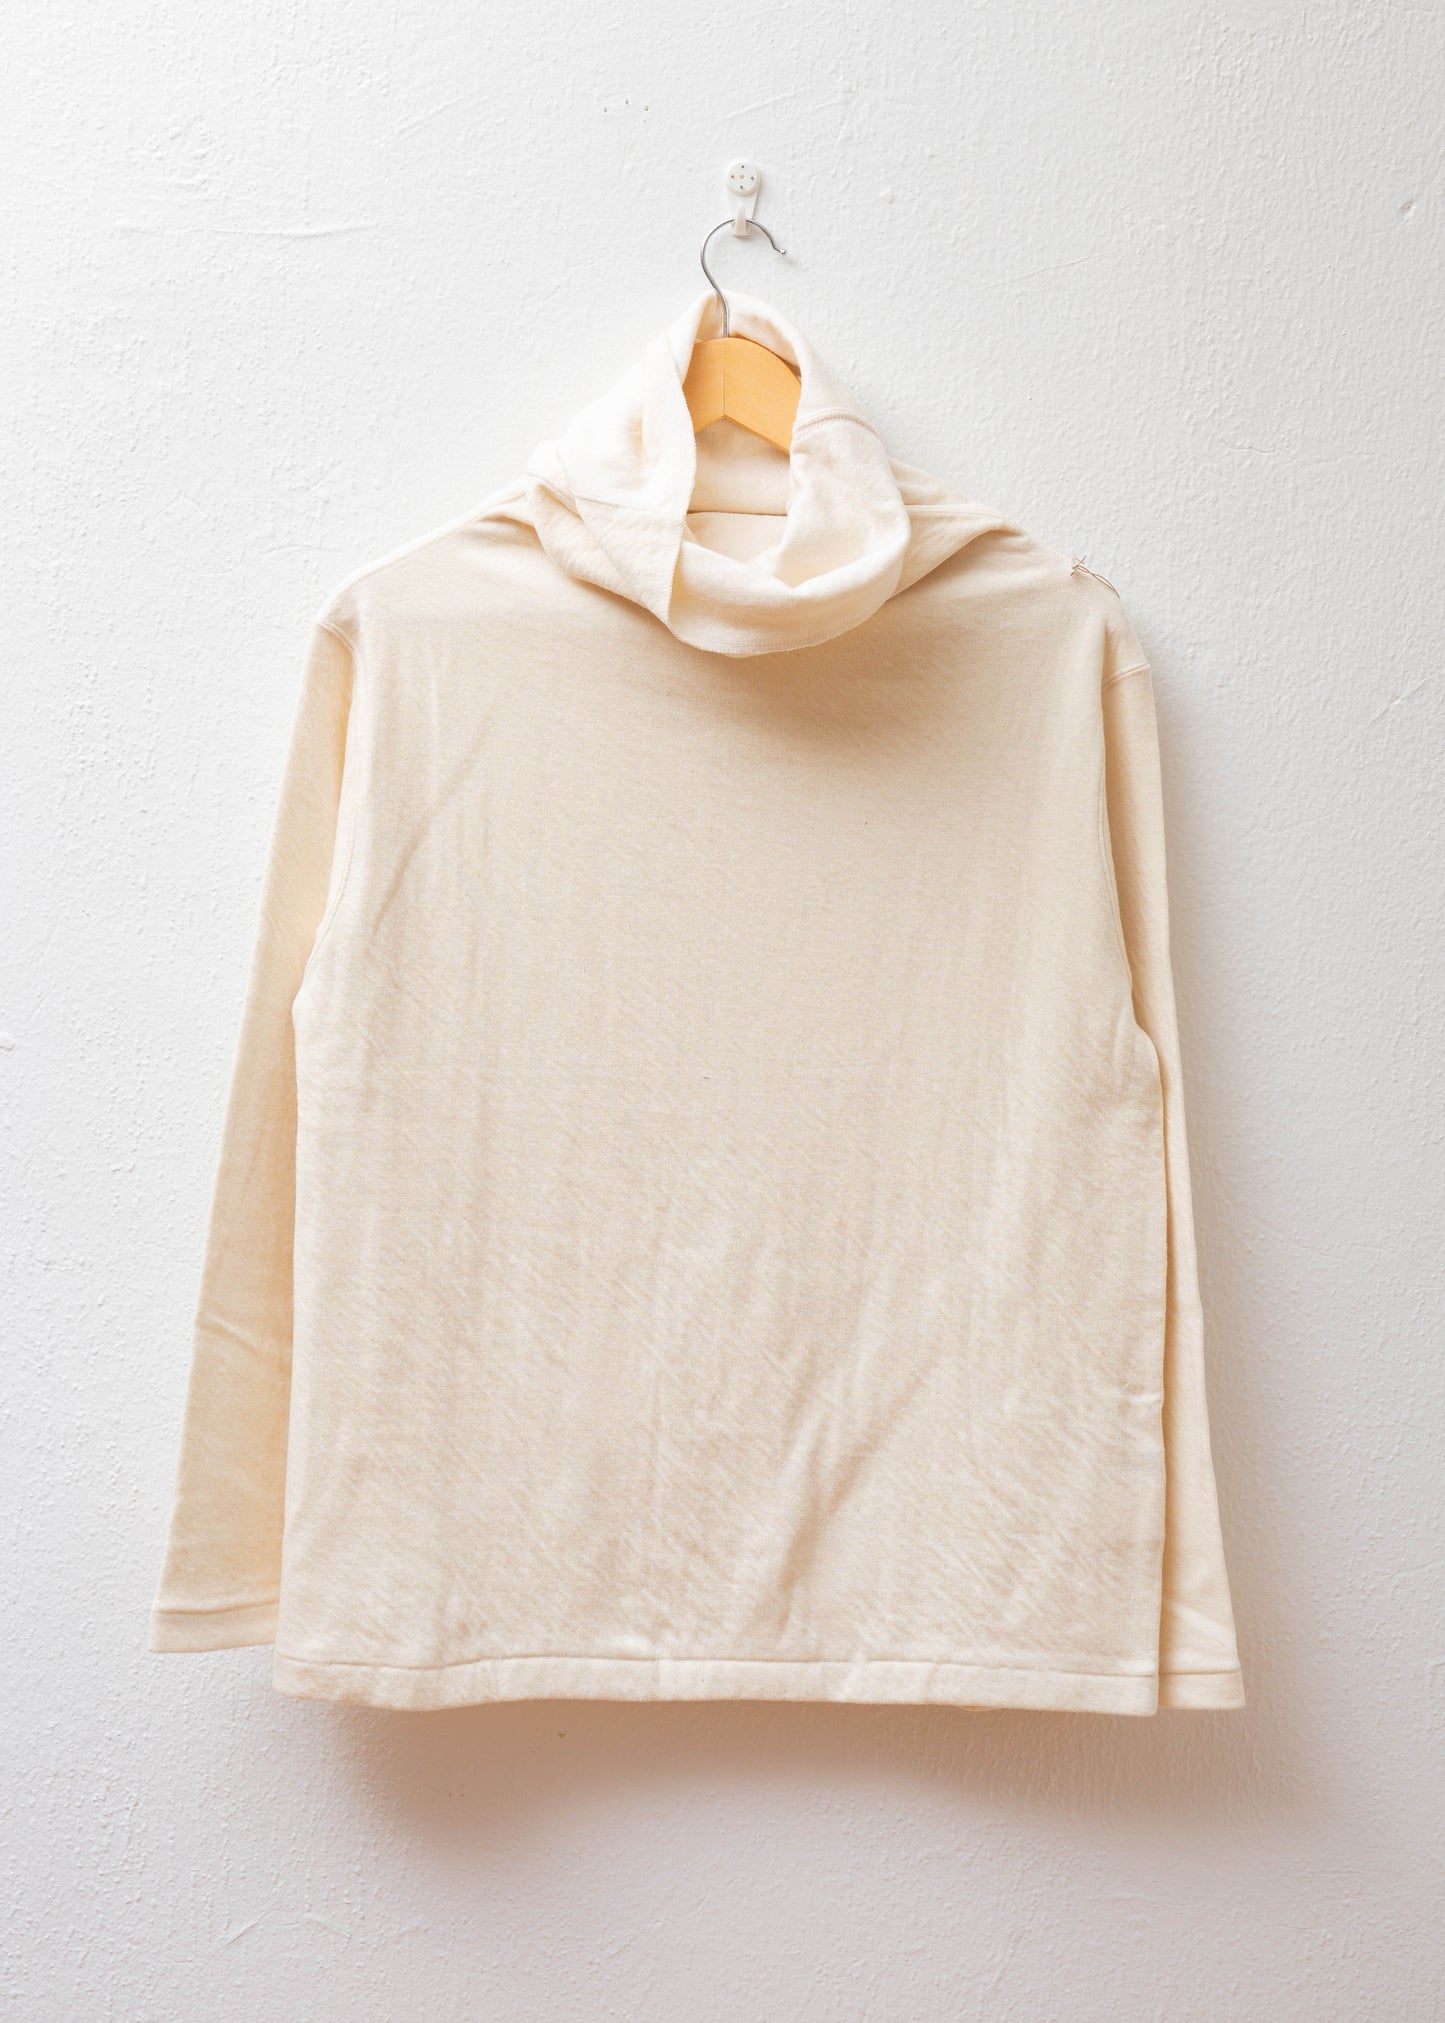 Turtleneck Pullover in color natural hanging on white wall